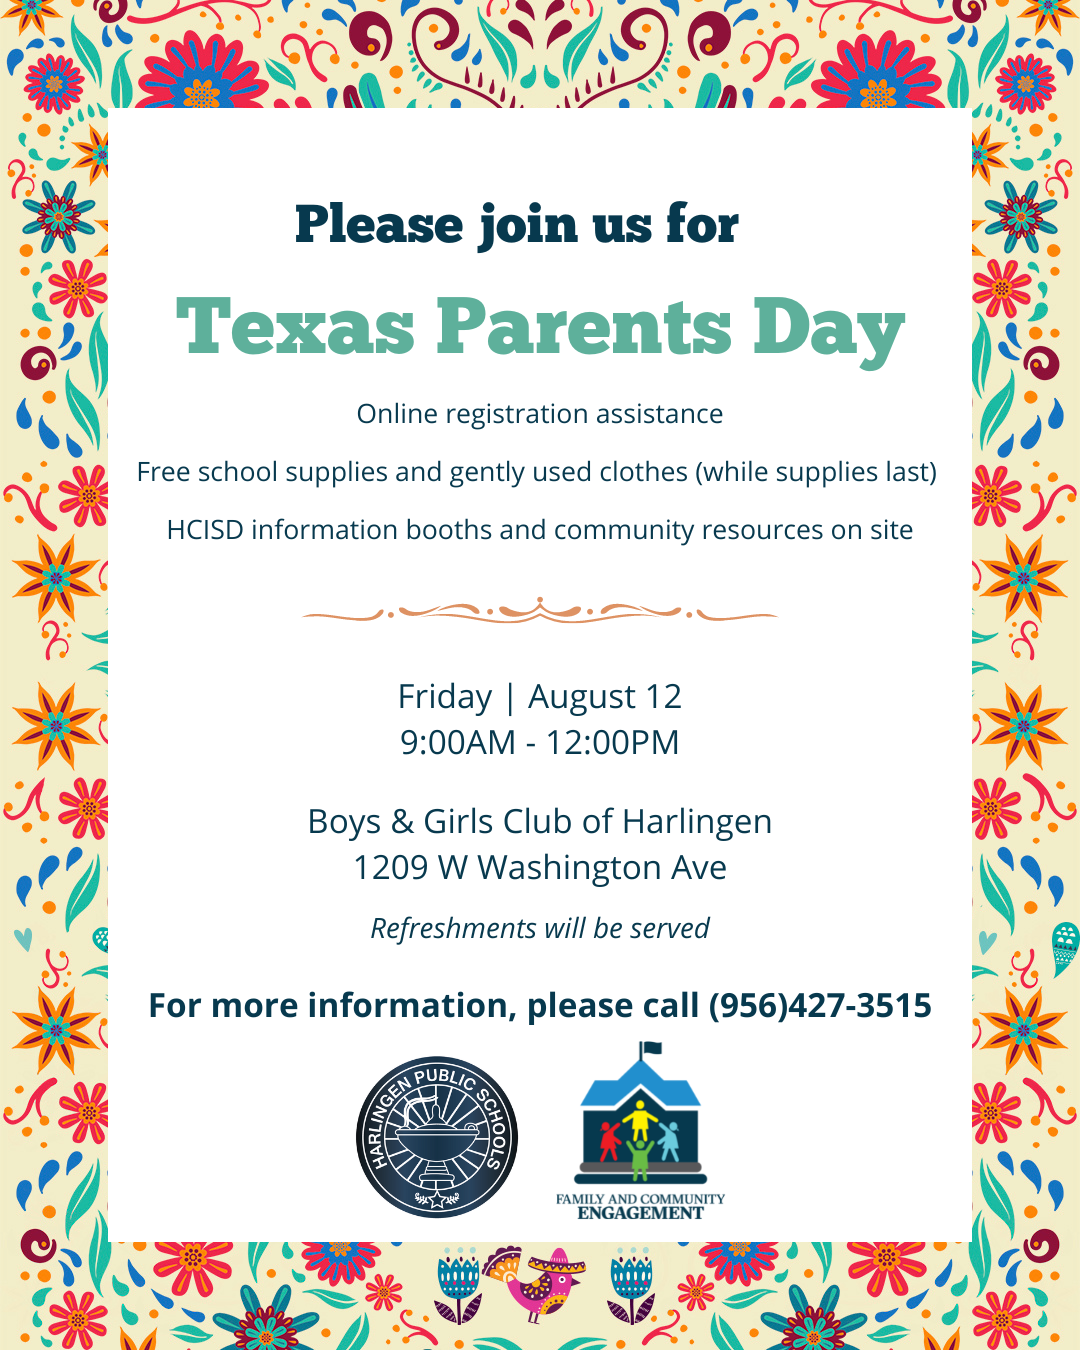 Texas Parents Day